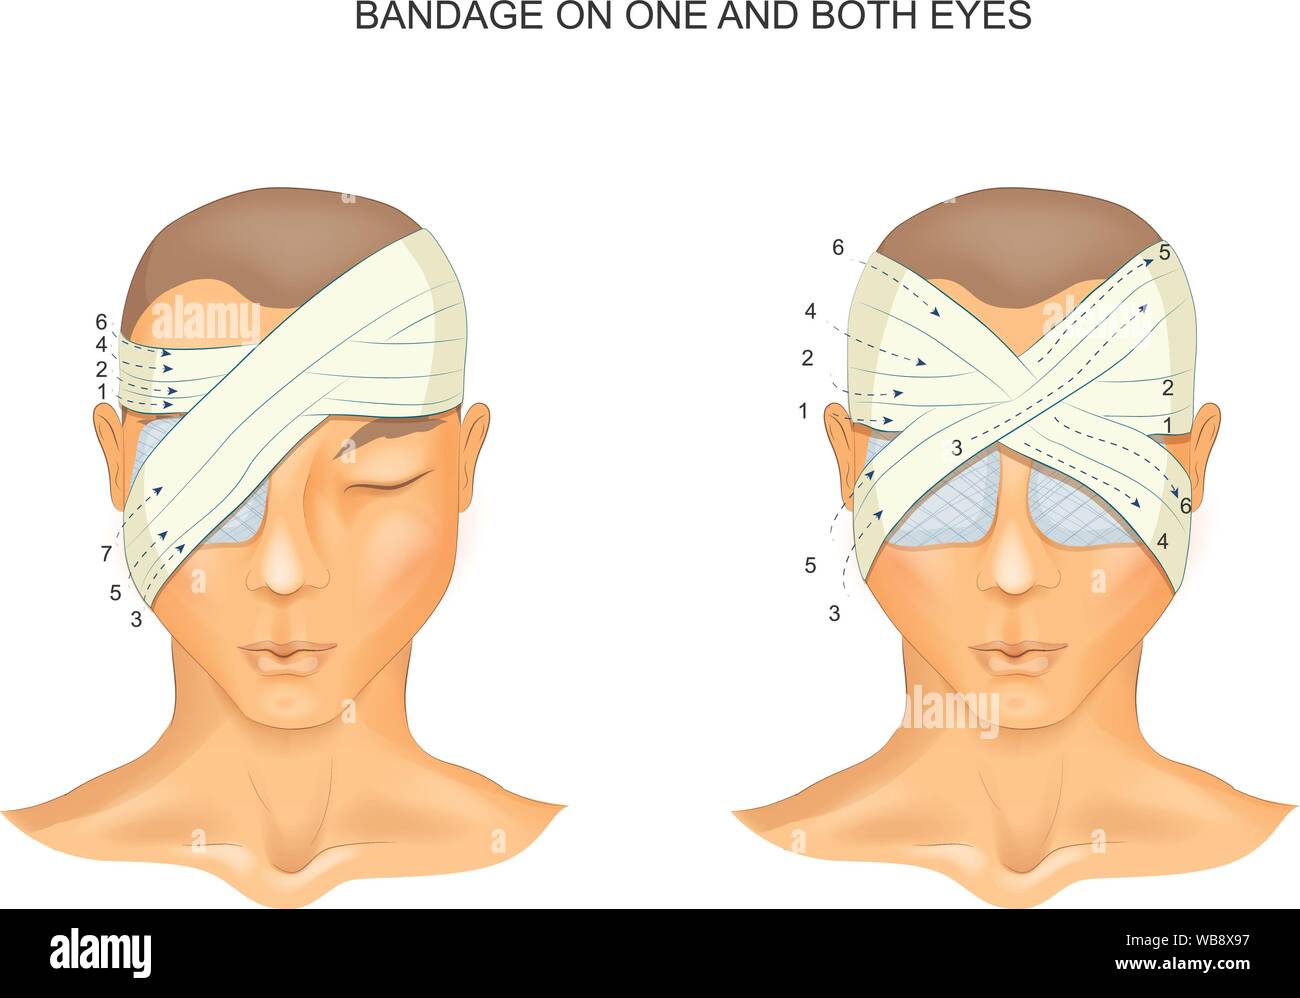 vector illustration of the bandage on one and both eyes Stock Vector